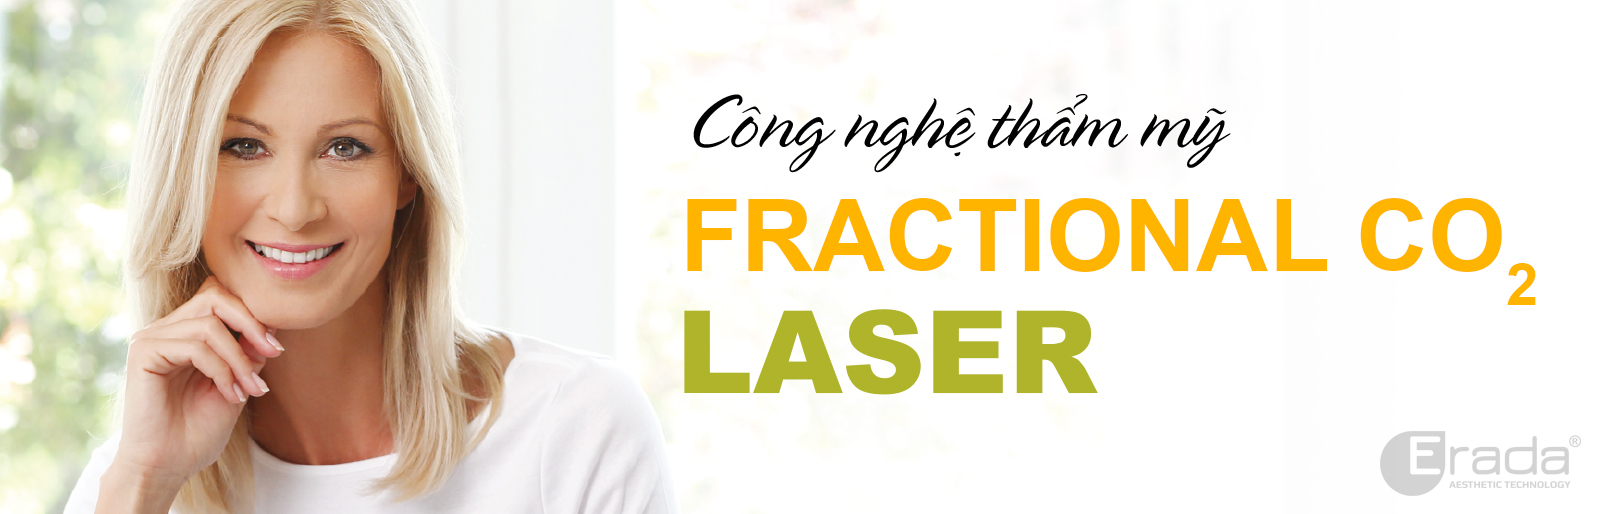 fractional-CO2-laser-cong-nghe-laser-moi-nhat-danh-cho-spa-tham-my-vien-1